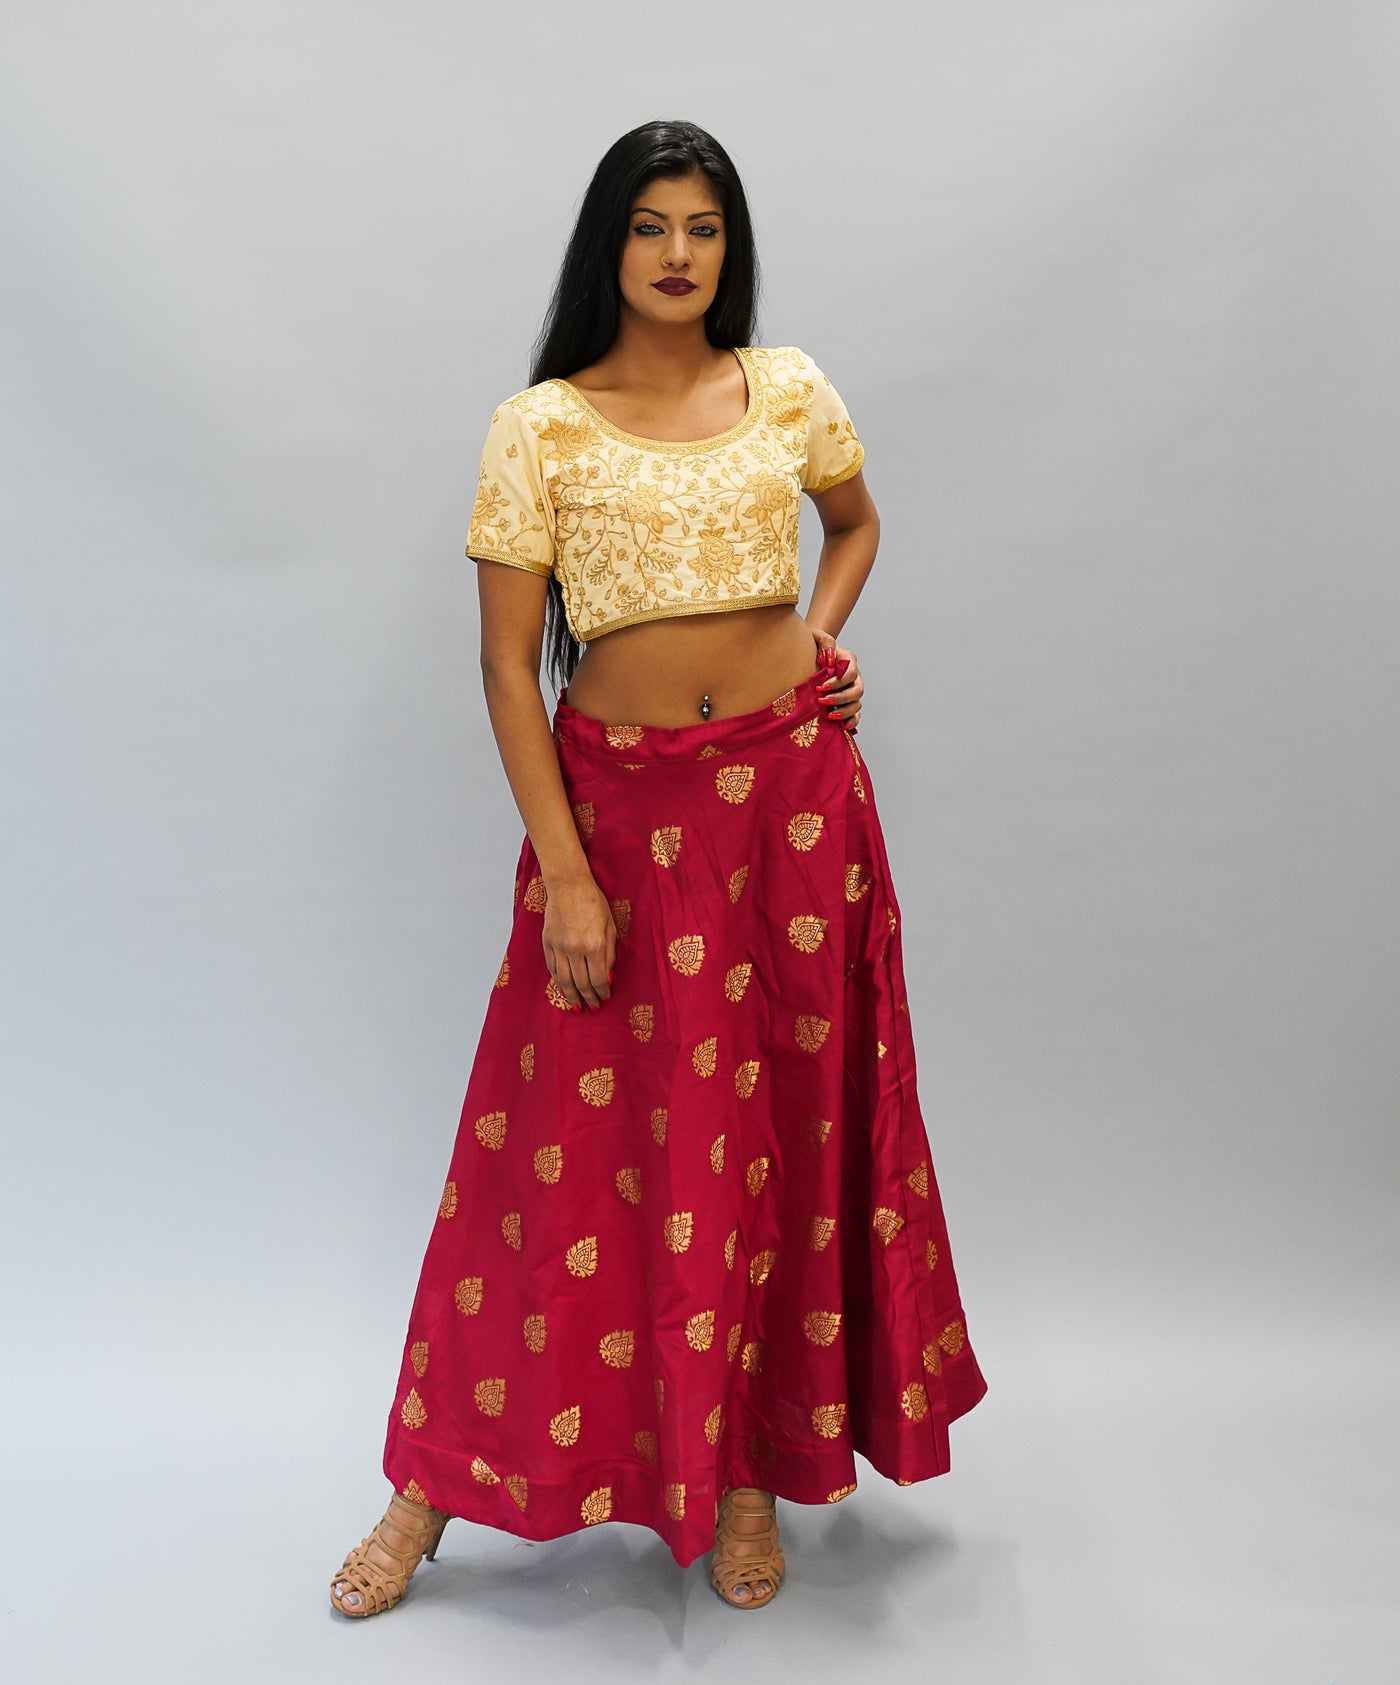 Buy Women's Pink Flared Brocade Skirt for All Plus Size and Small Size  (Size: XXS -8XL) (Medium) (Waist: 34-35inches) at Amazon.in